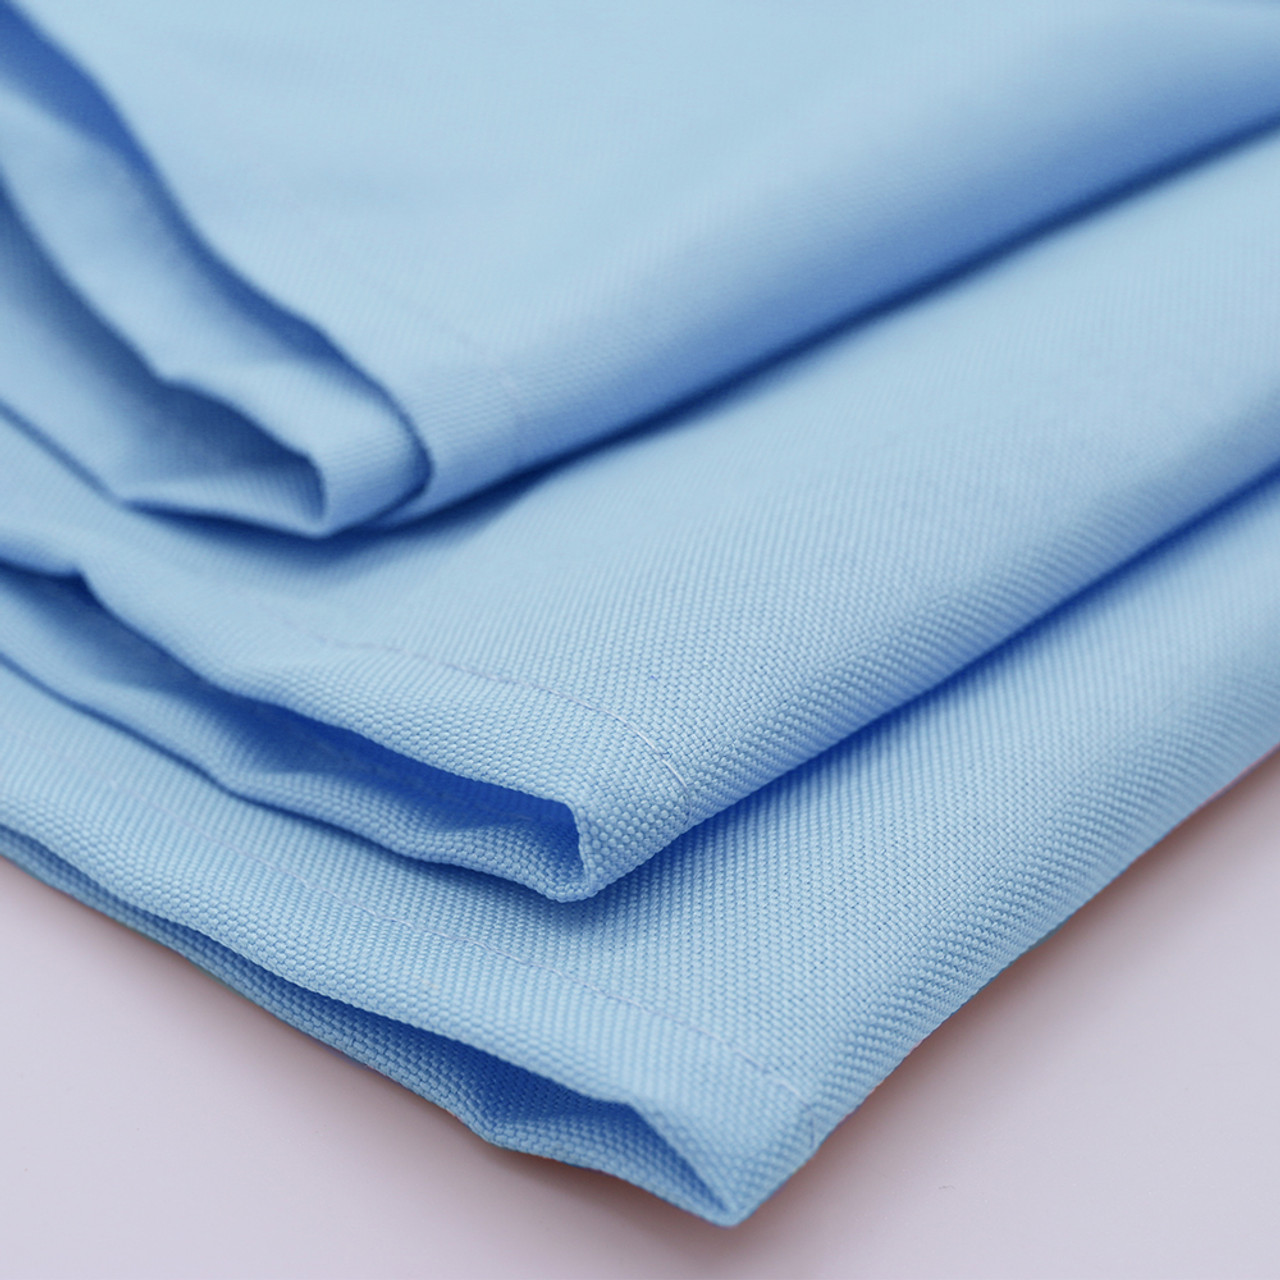 Light Blue Polyester Cloth Napkins | Your Chair Covers.com